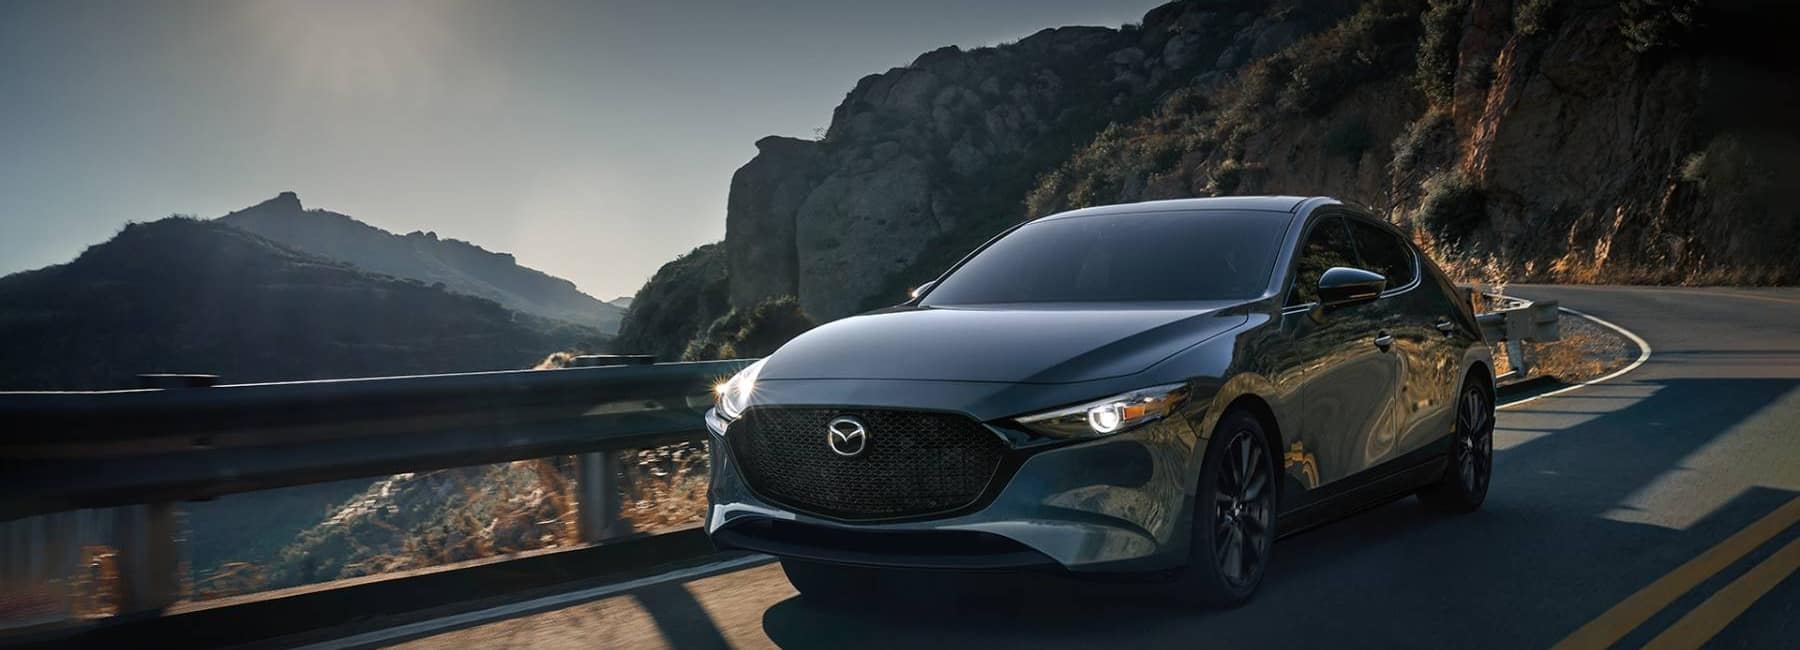 2021-mazda-3-hatchback-compact-car-3qview-driving-mountain-road-grey